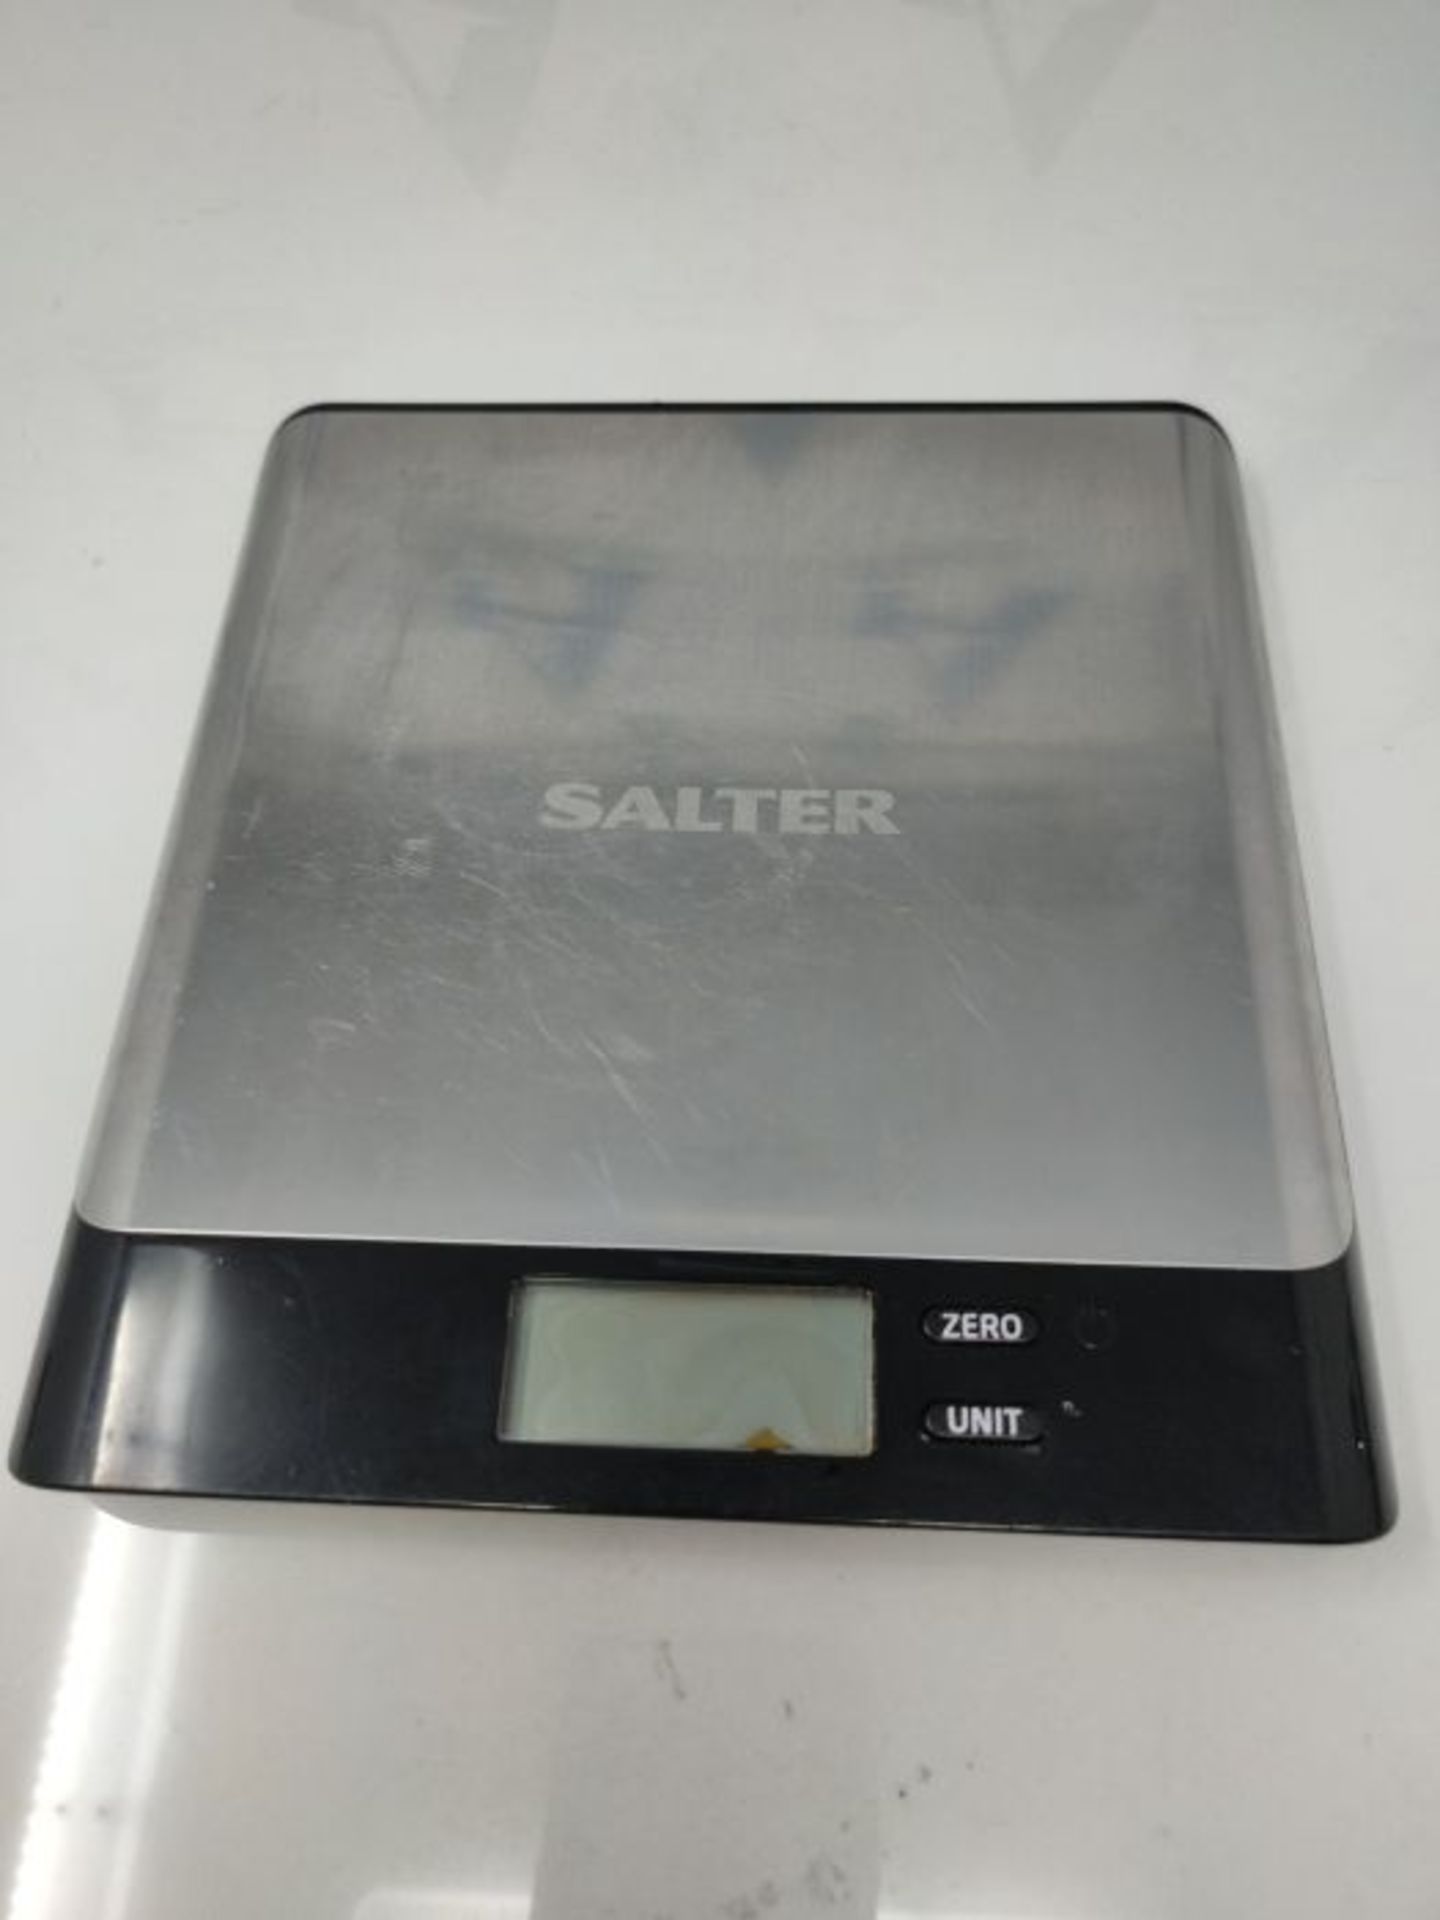 Salter 1052A SSBKDR Arc Pro Stainless Steel Kitchen Scale, Compact, 5 kg Max Capacity, - Image 2 of 3